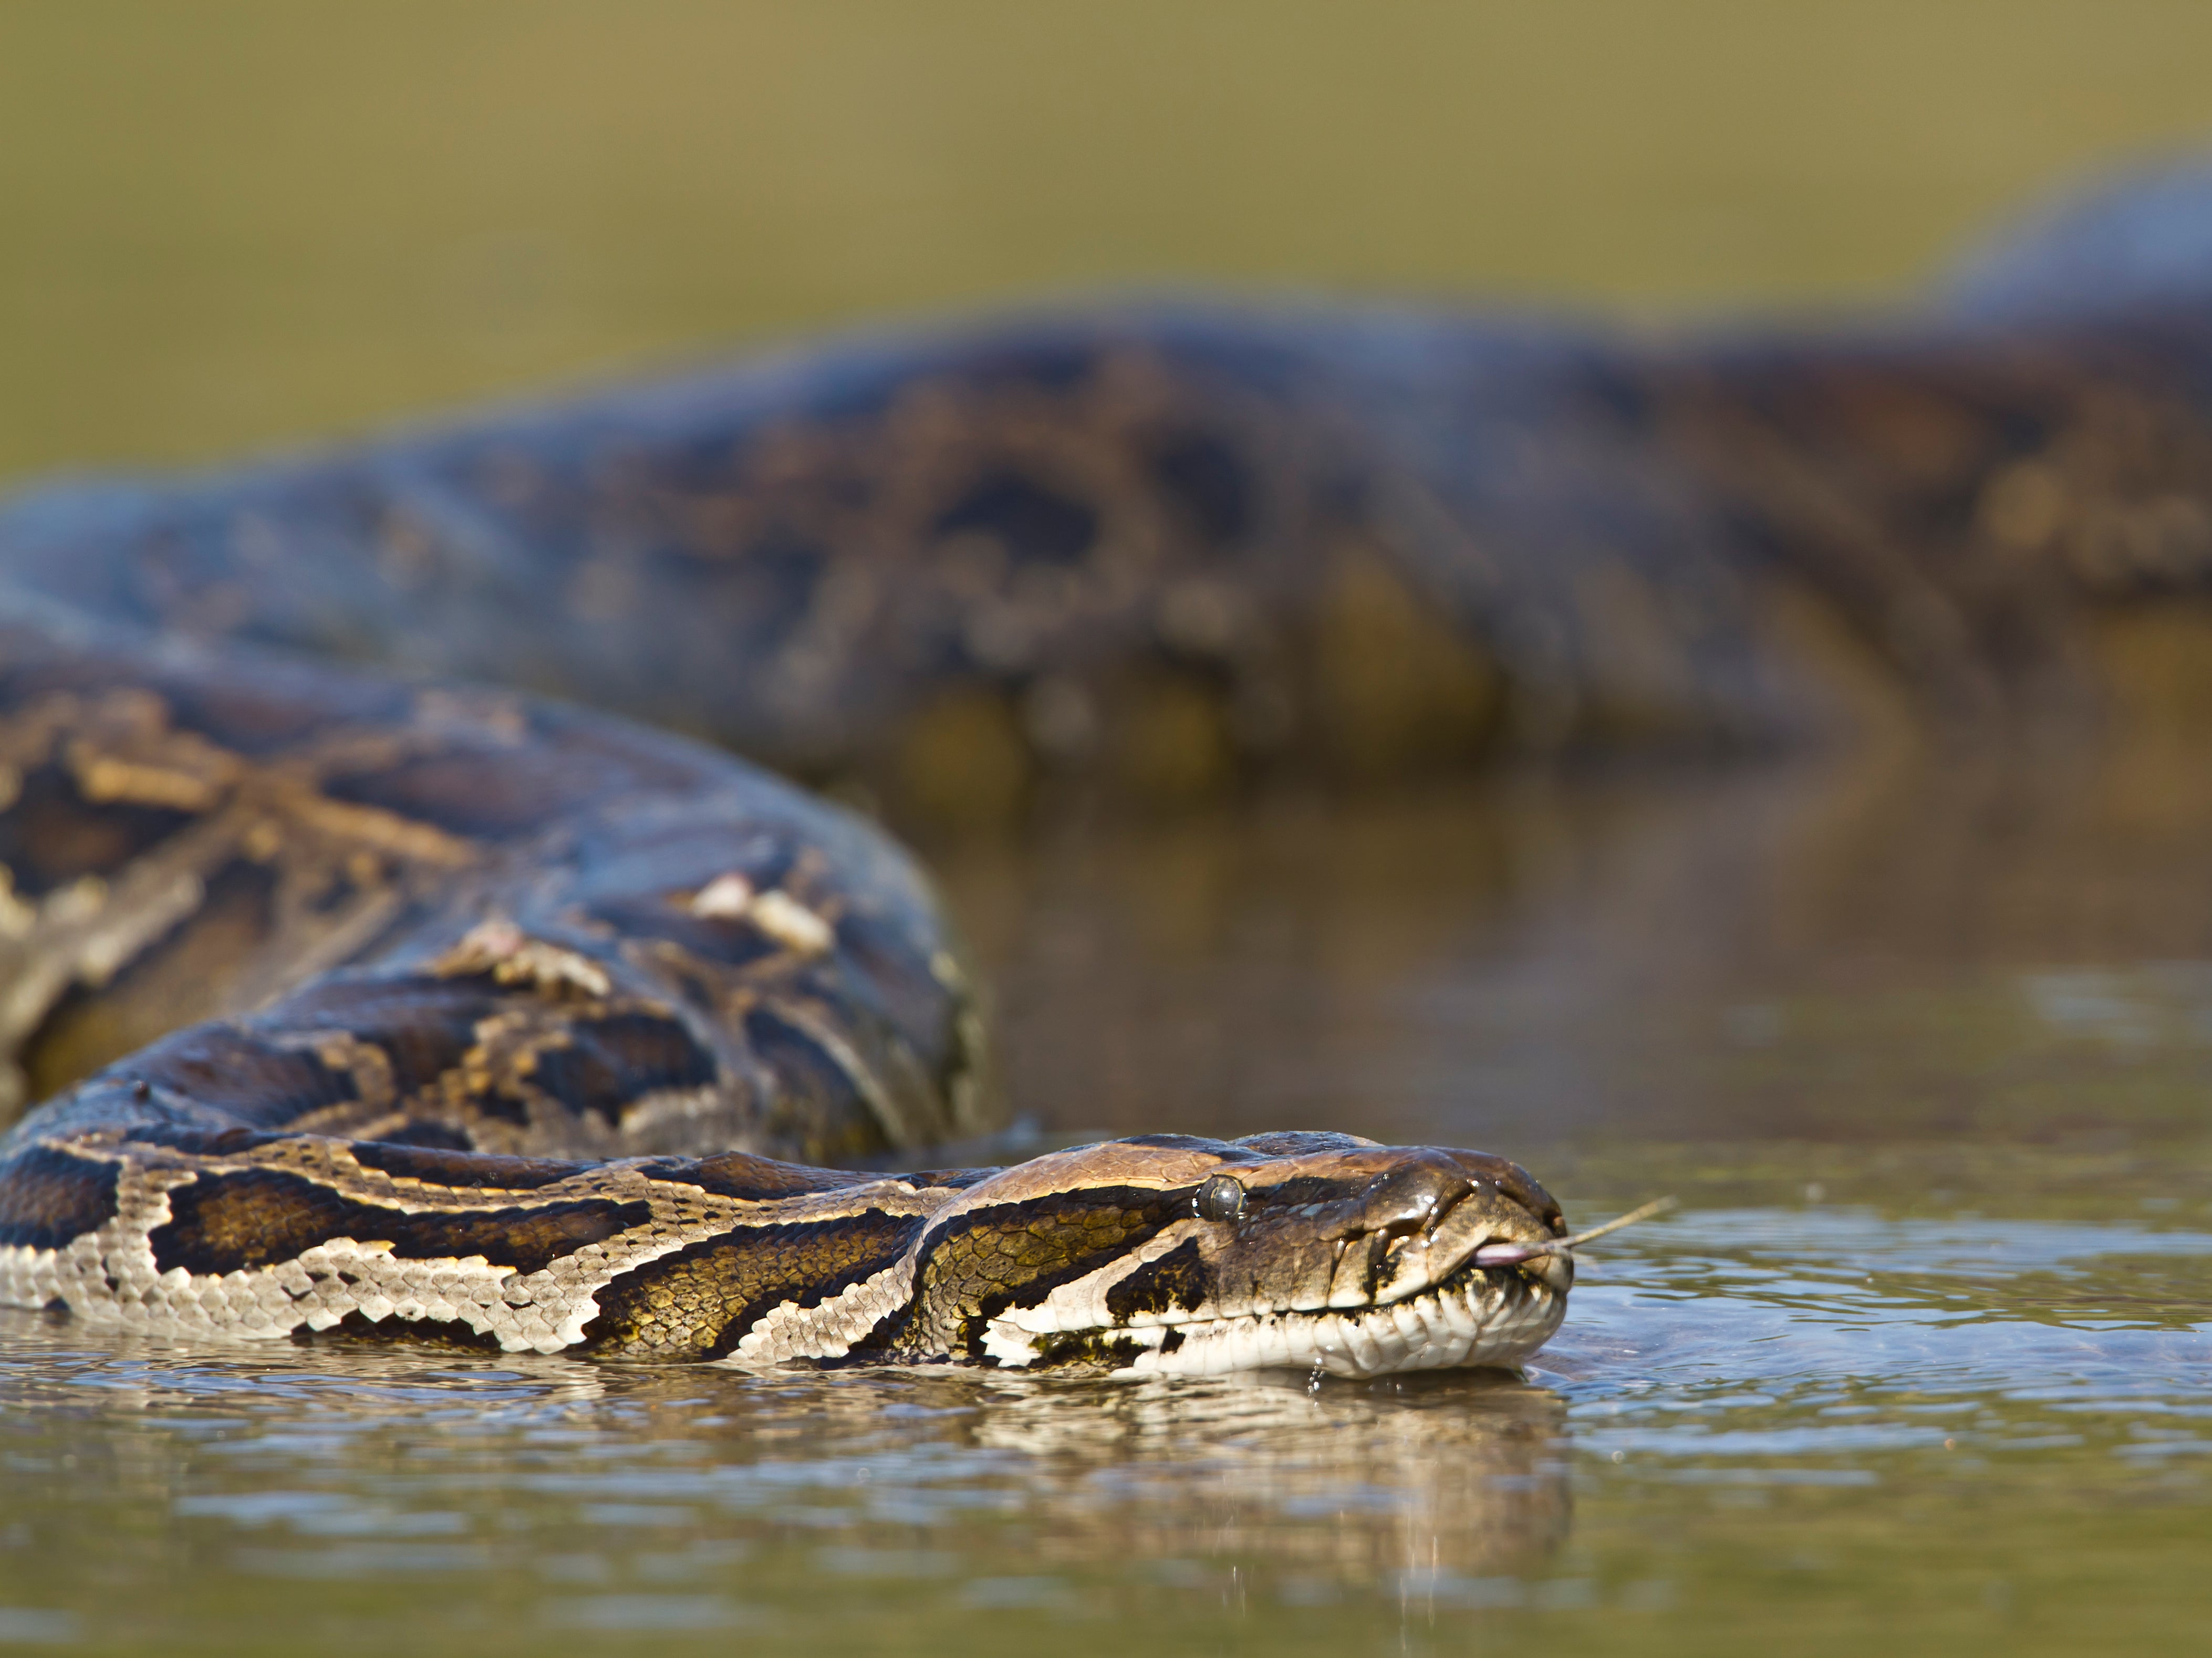 A python lurking in the water